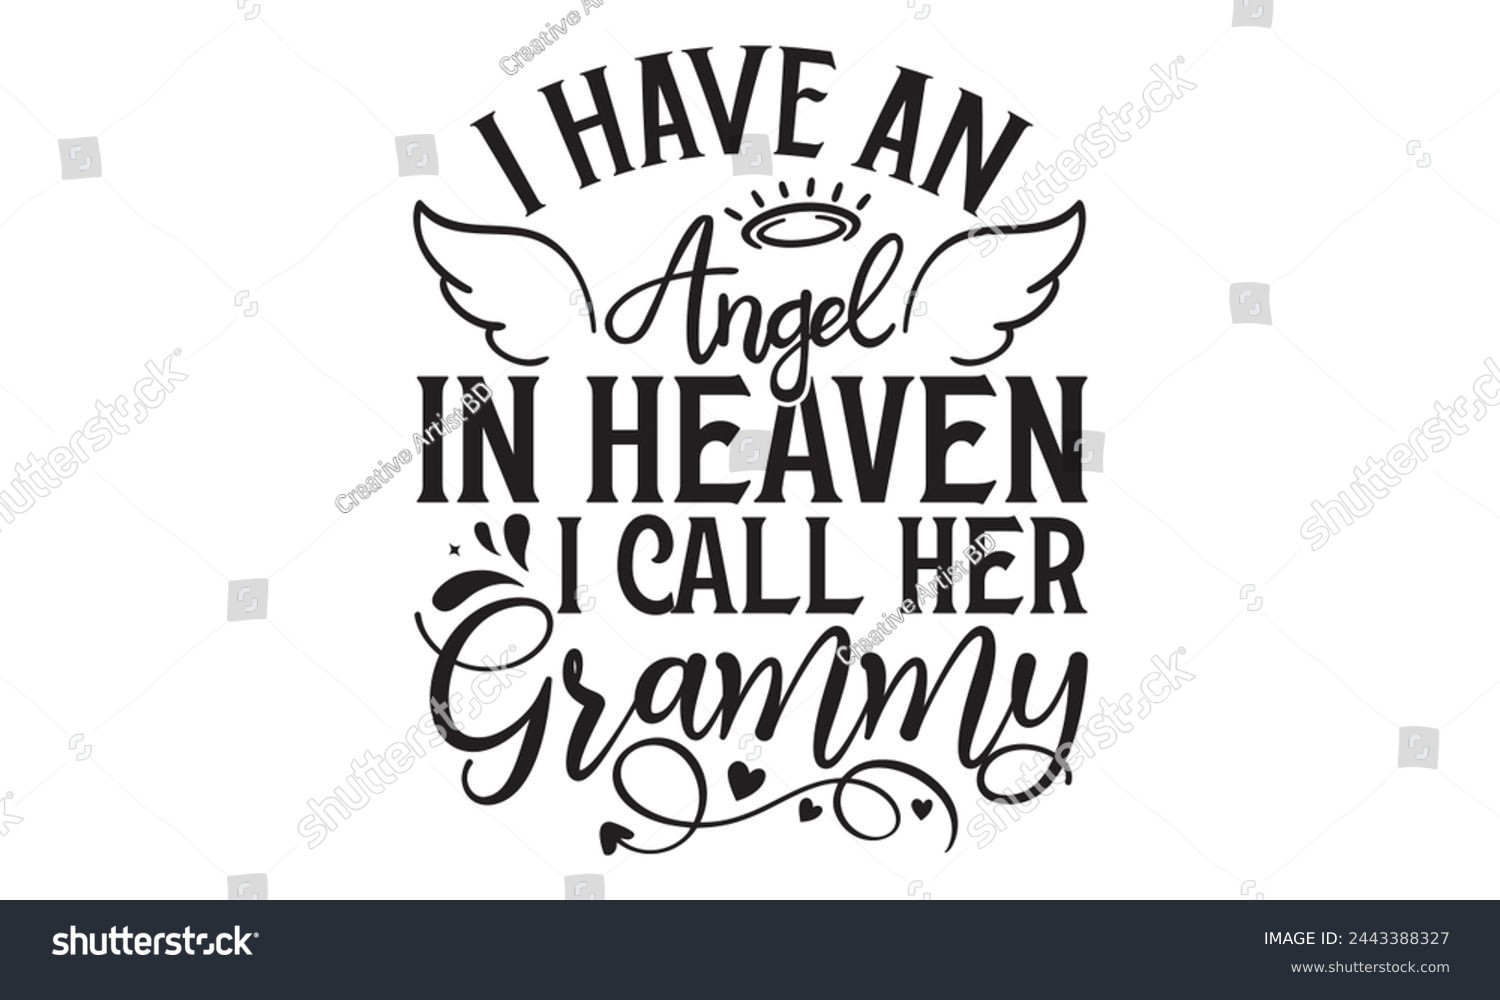 SVG of I Have An Angel In Heaven I Call Her Grammy - Memorial T shirt Design, Handmade calligraphy vector illustration, used for poster, simple, lettering  For stickers, mugs, etc. svg